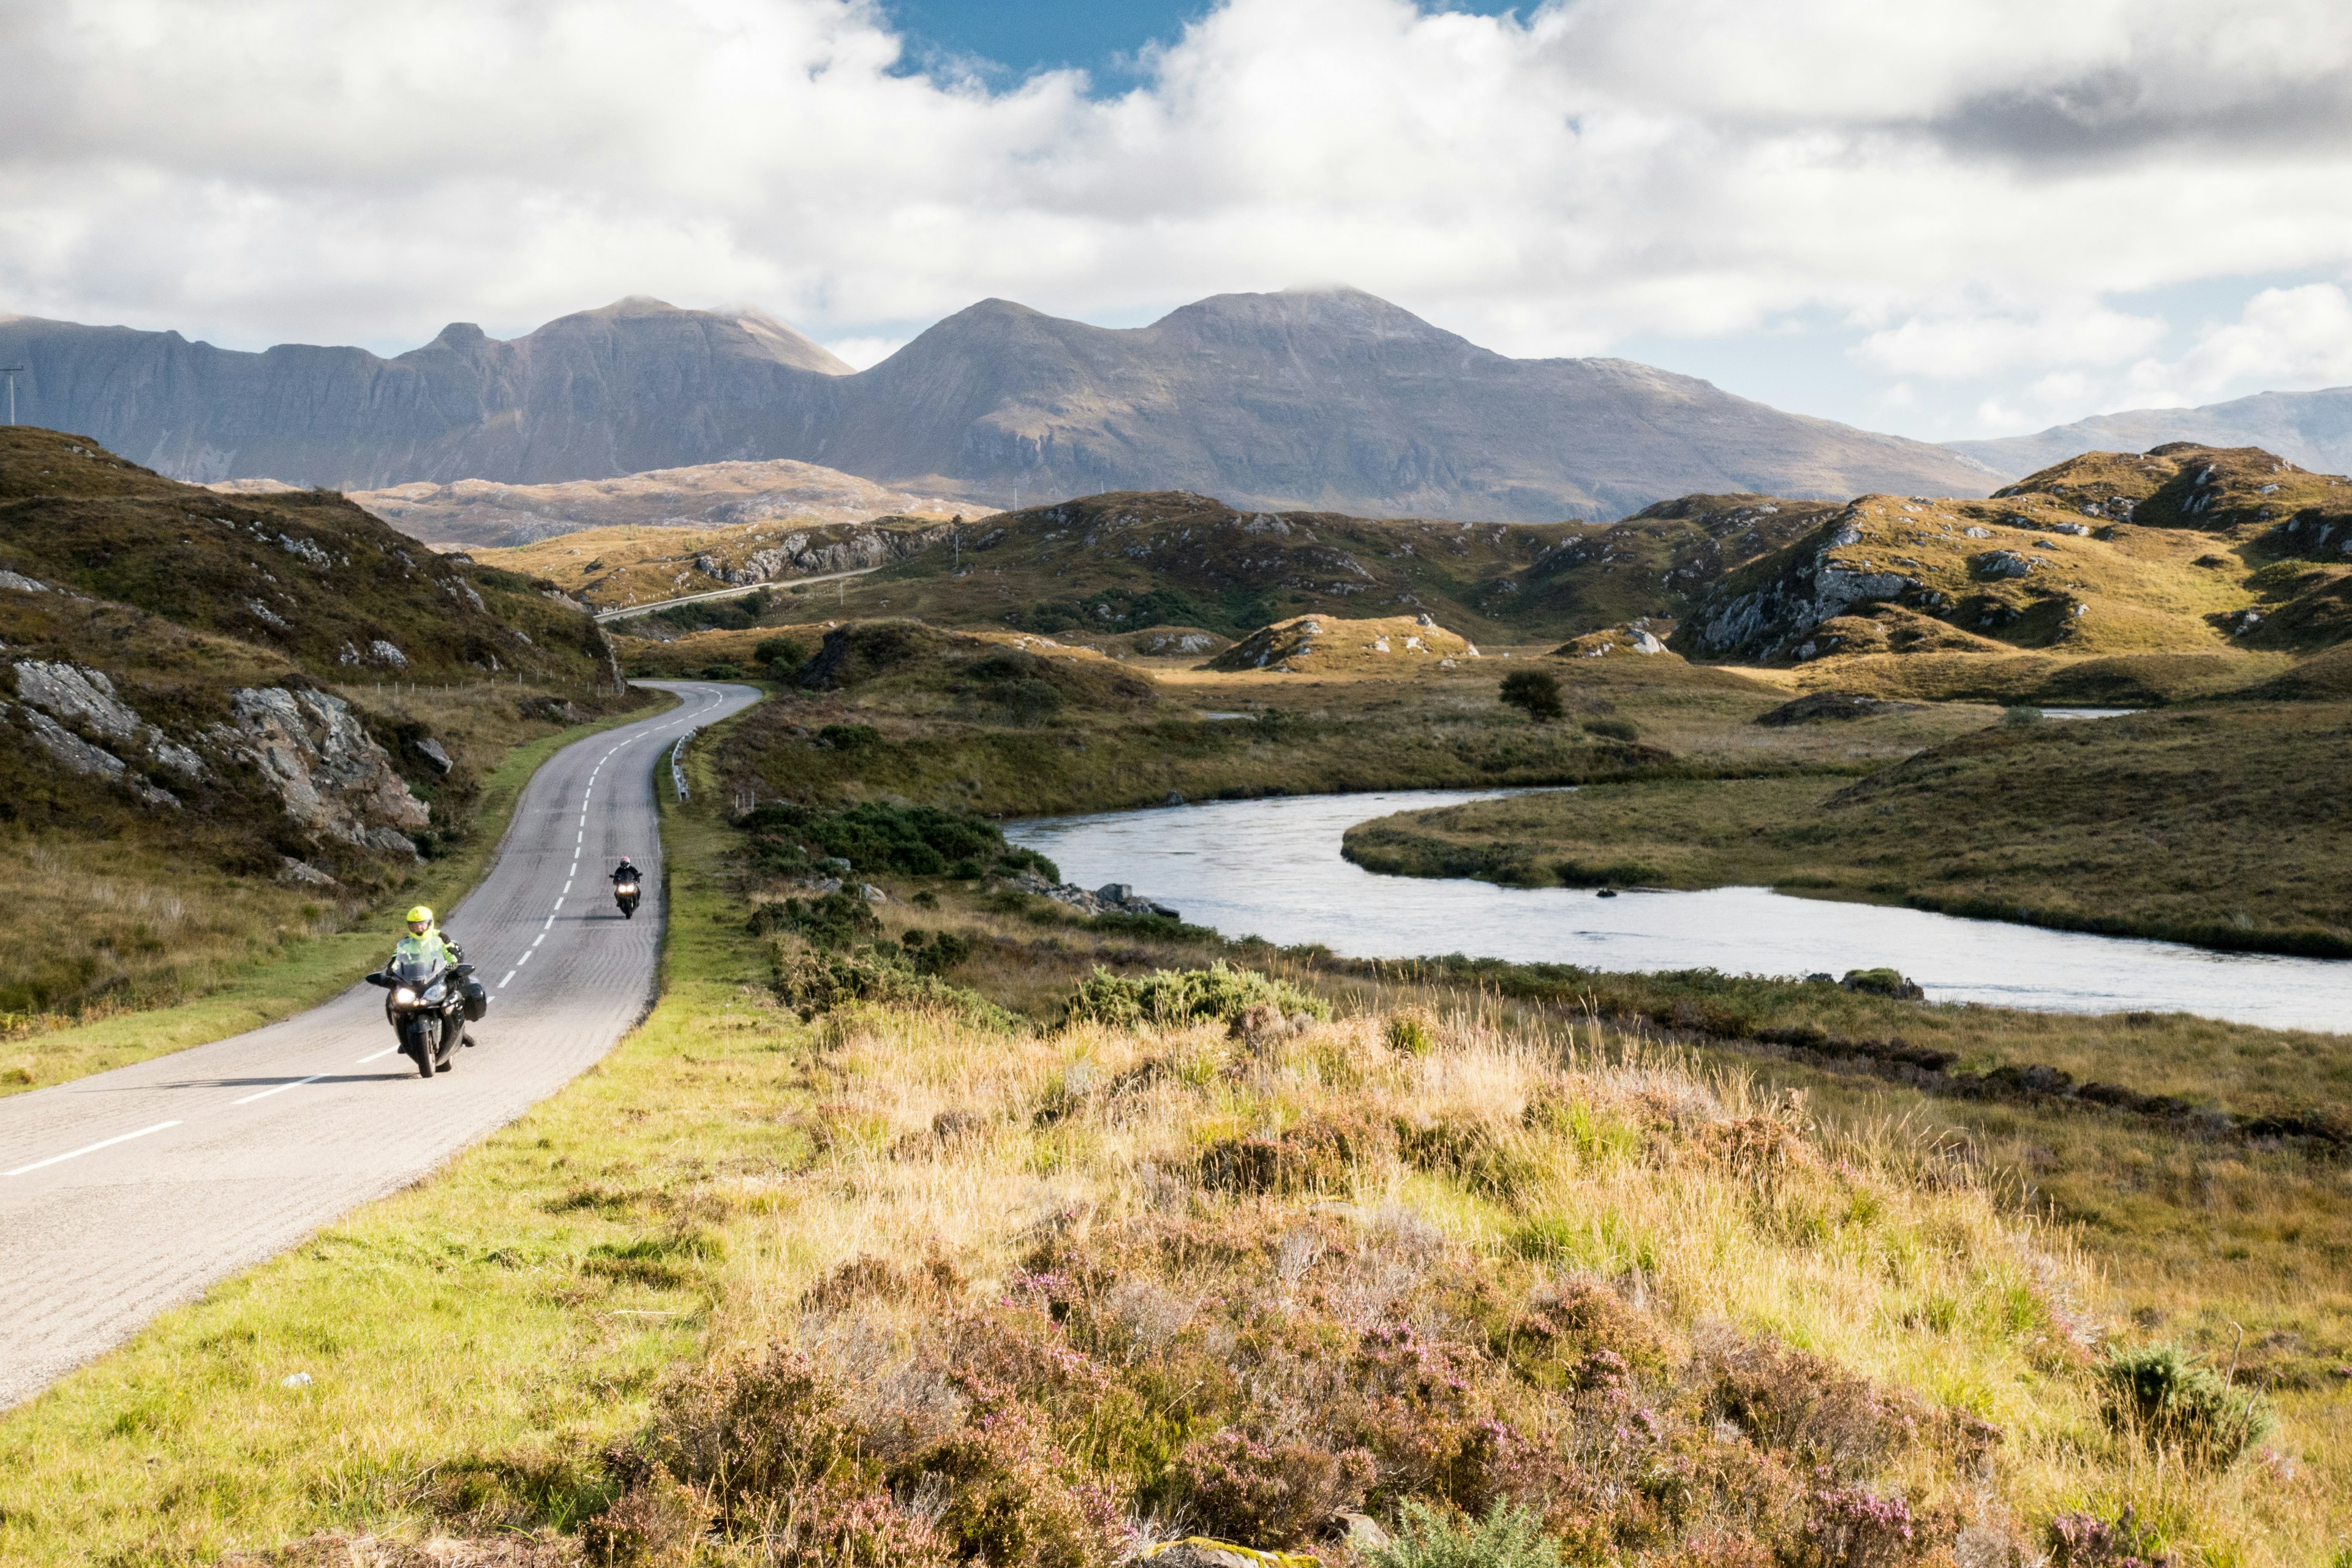 The A837 road, part of the North Coast 500 route, meanders past rivers and low hills in the glacial landscape of Assynt, with Quinag mountain in the distance, in the Northwest Highlands of Scotland.; Shutterstock ID 1114531469; your: Claire naylor; gl: 65050; netsuite: Online ed; full: Great British road trips update